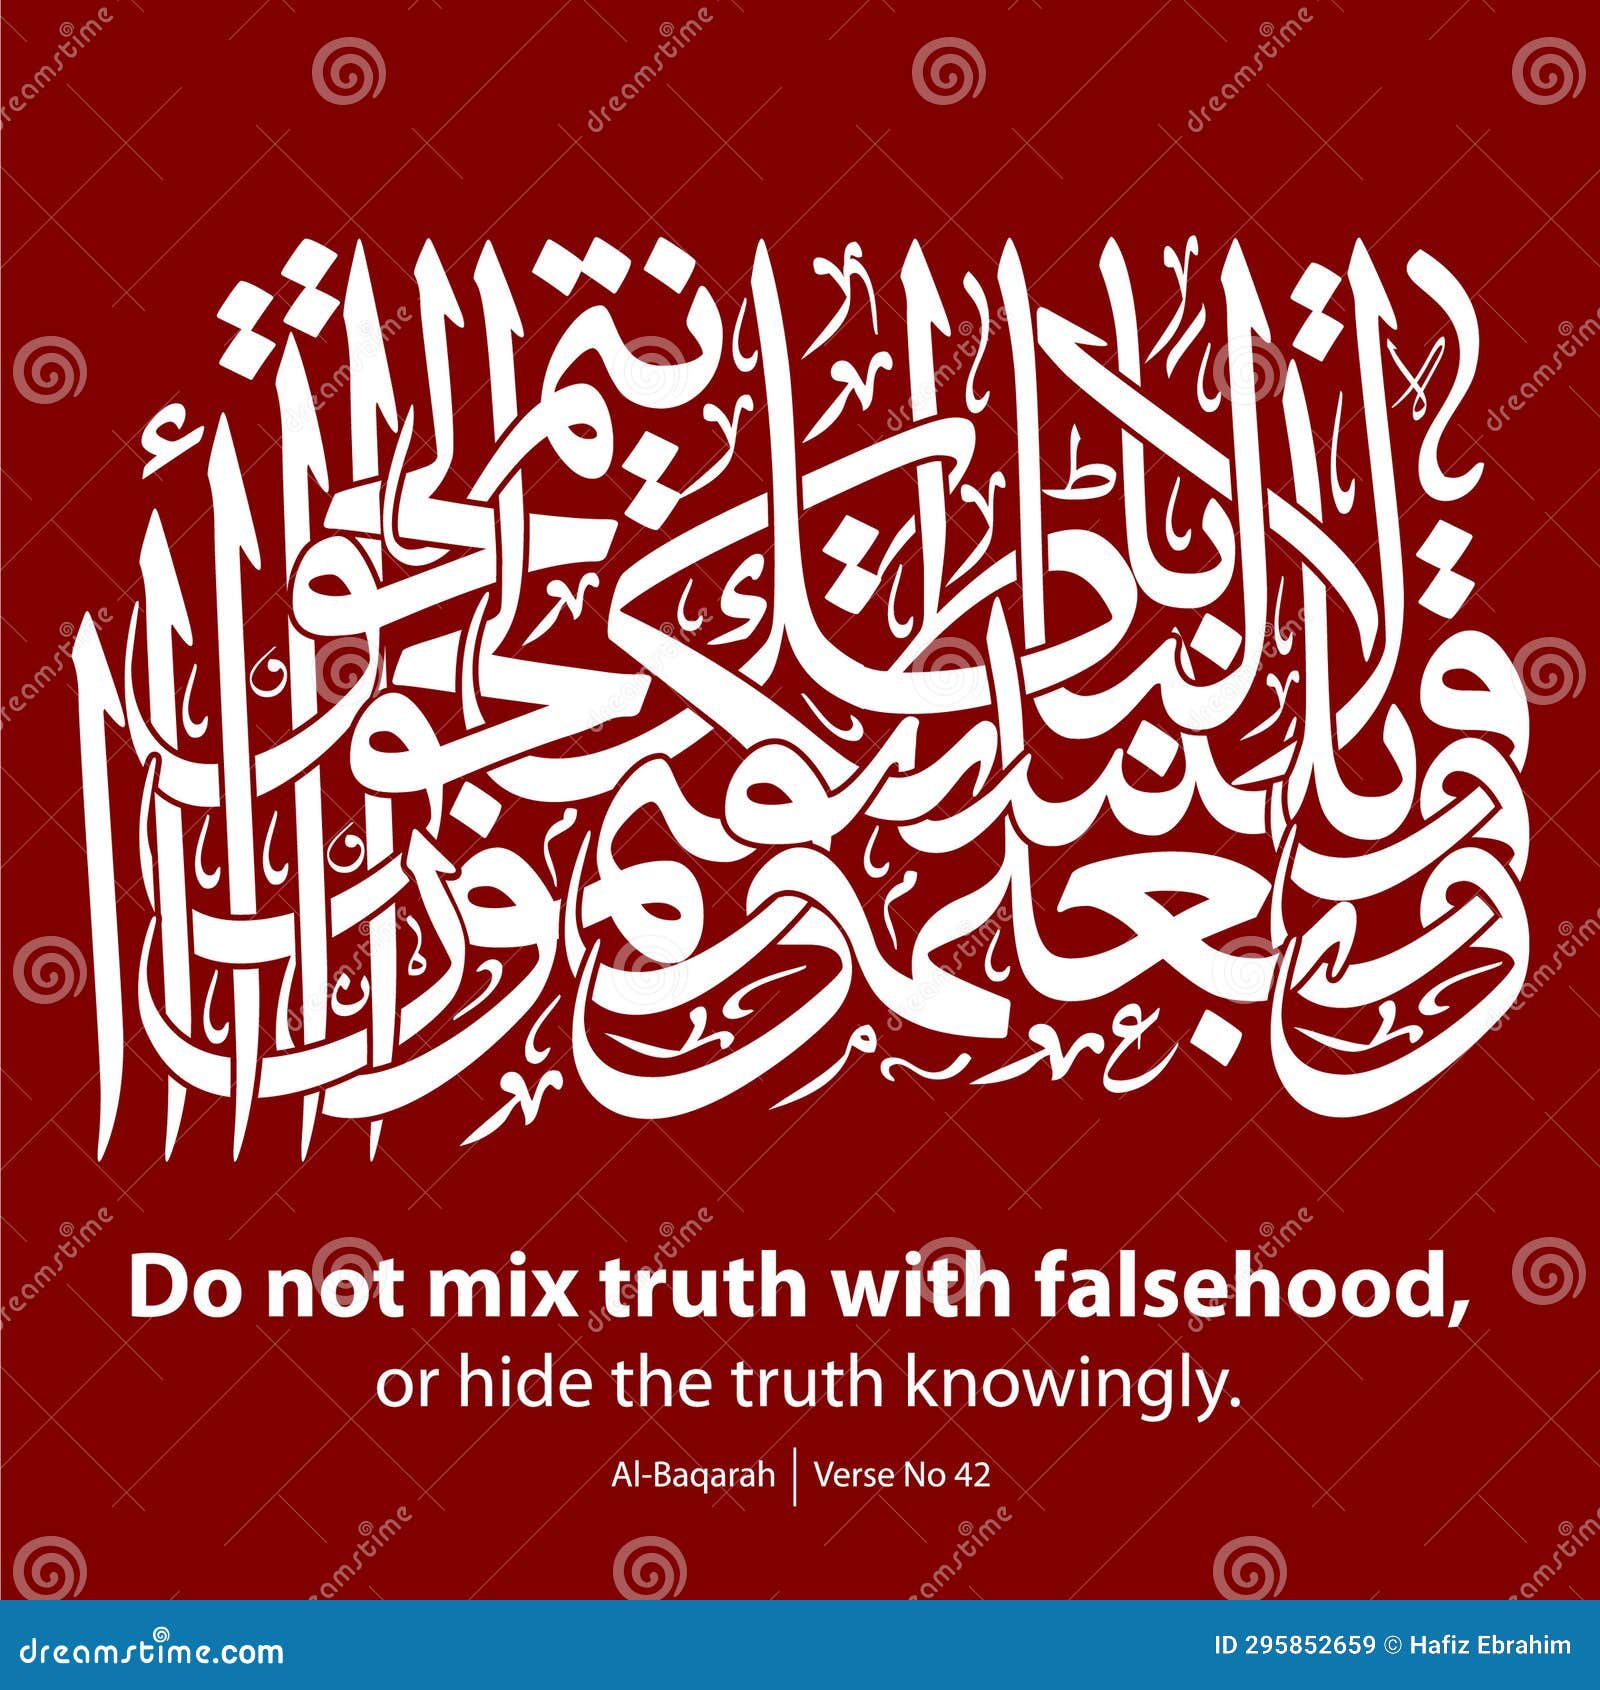 do not mix truth with falsehood or hide the truth knowingly